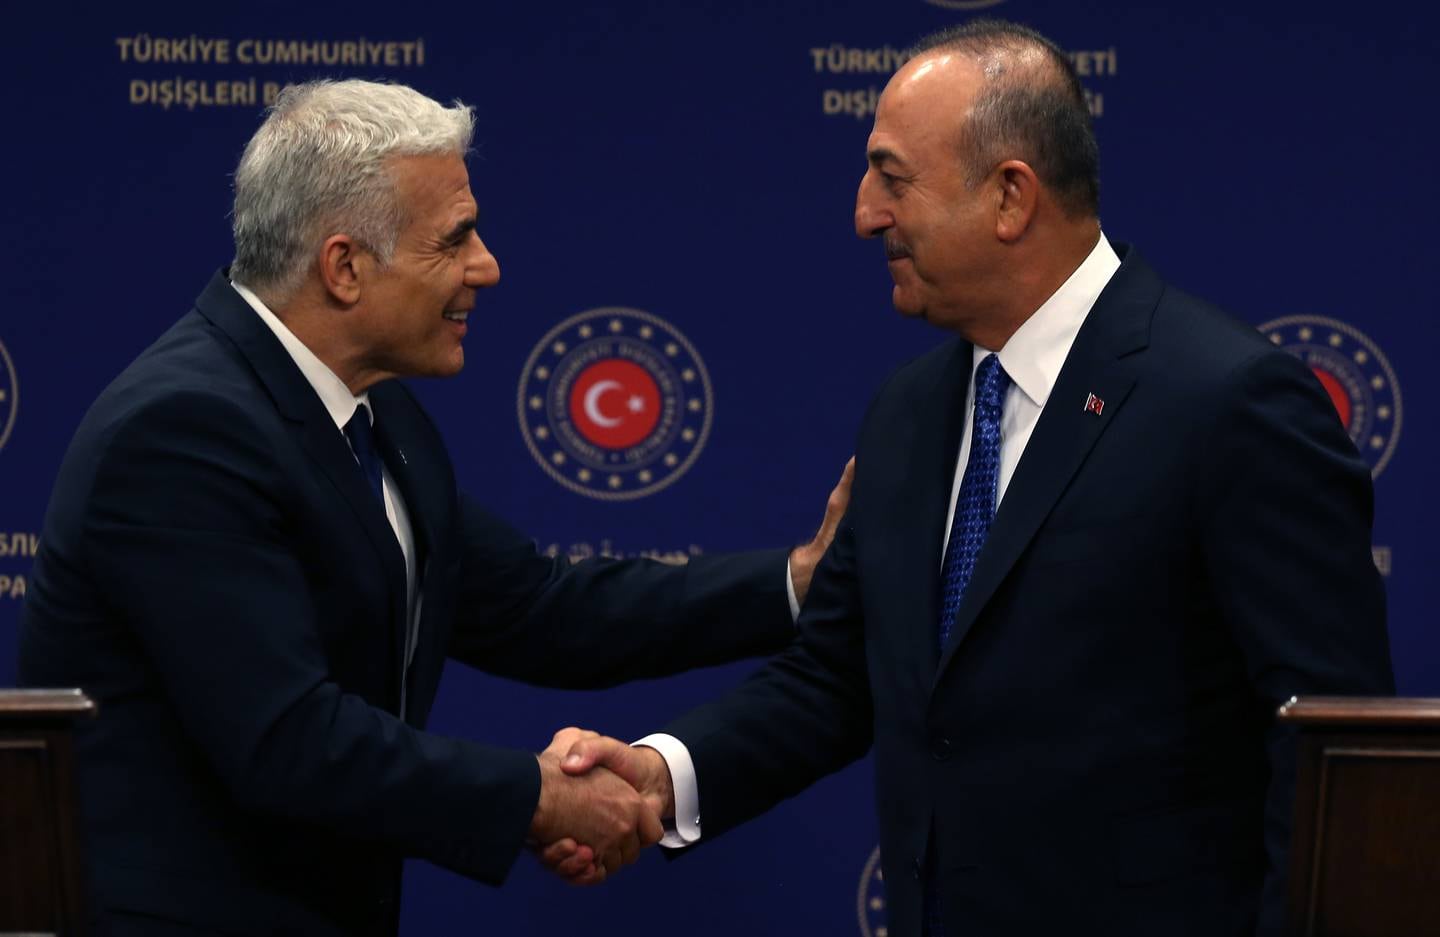 Turkish Foreign Minister Mevlut Cavusoglu, right, and Israeli Foreign Minister Yair Lapid meet in Ankara, Turkey. Mr Lapid was visiting Turkey for talks that were expected to focus on security co-operation. EPA